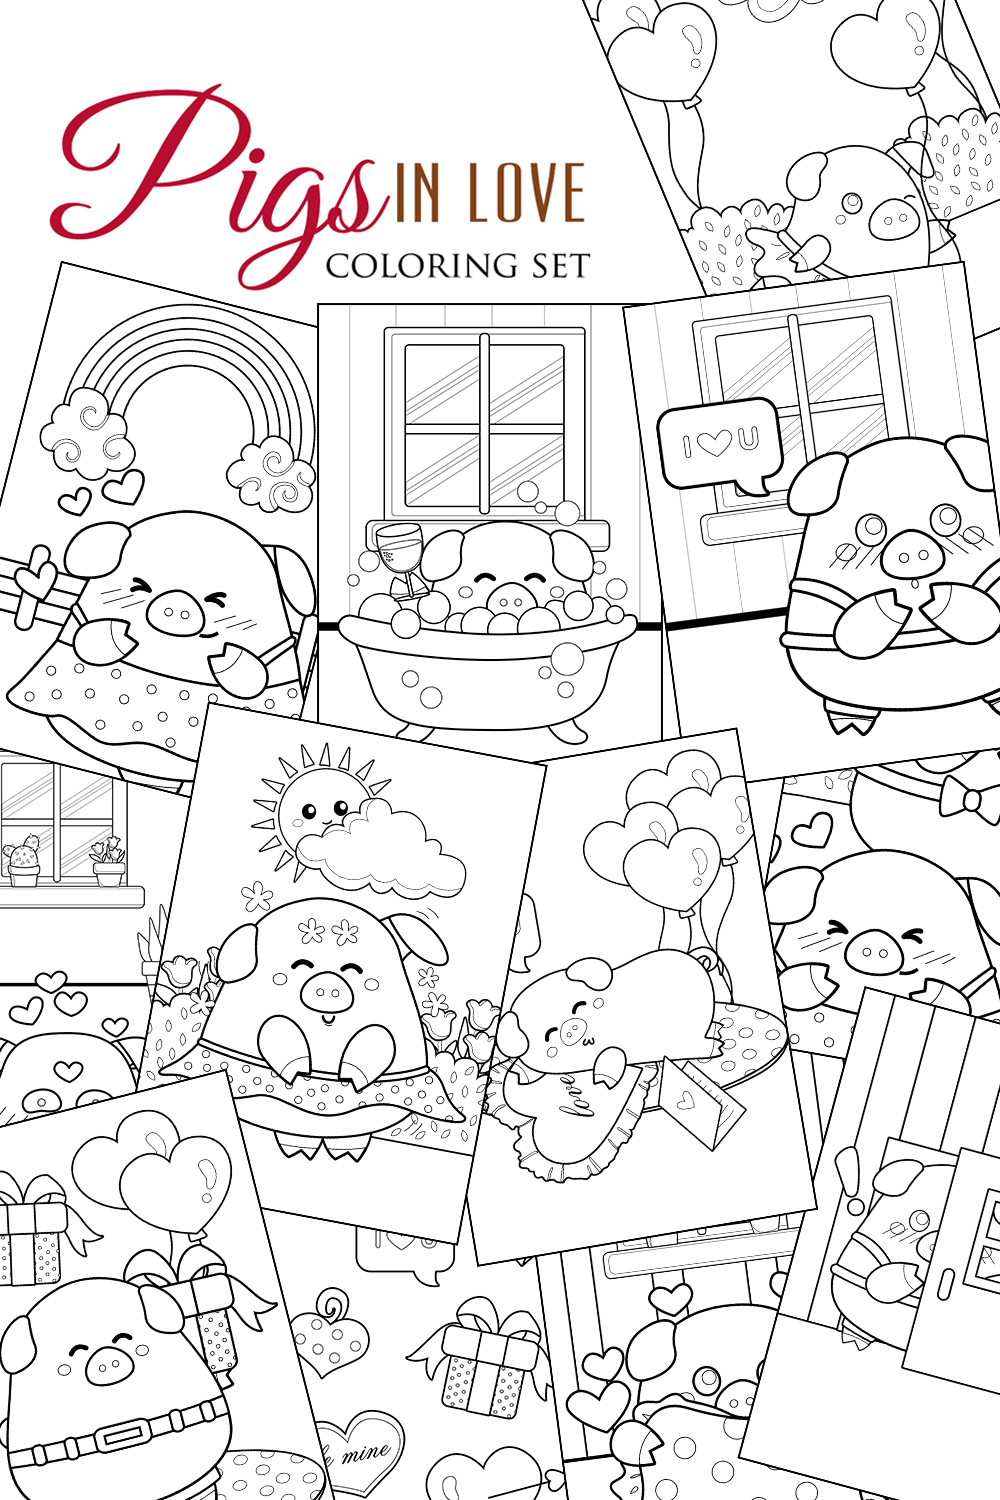 Pigs in Love Valentine Lovely Coloring Pages pinterest image.